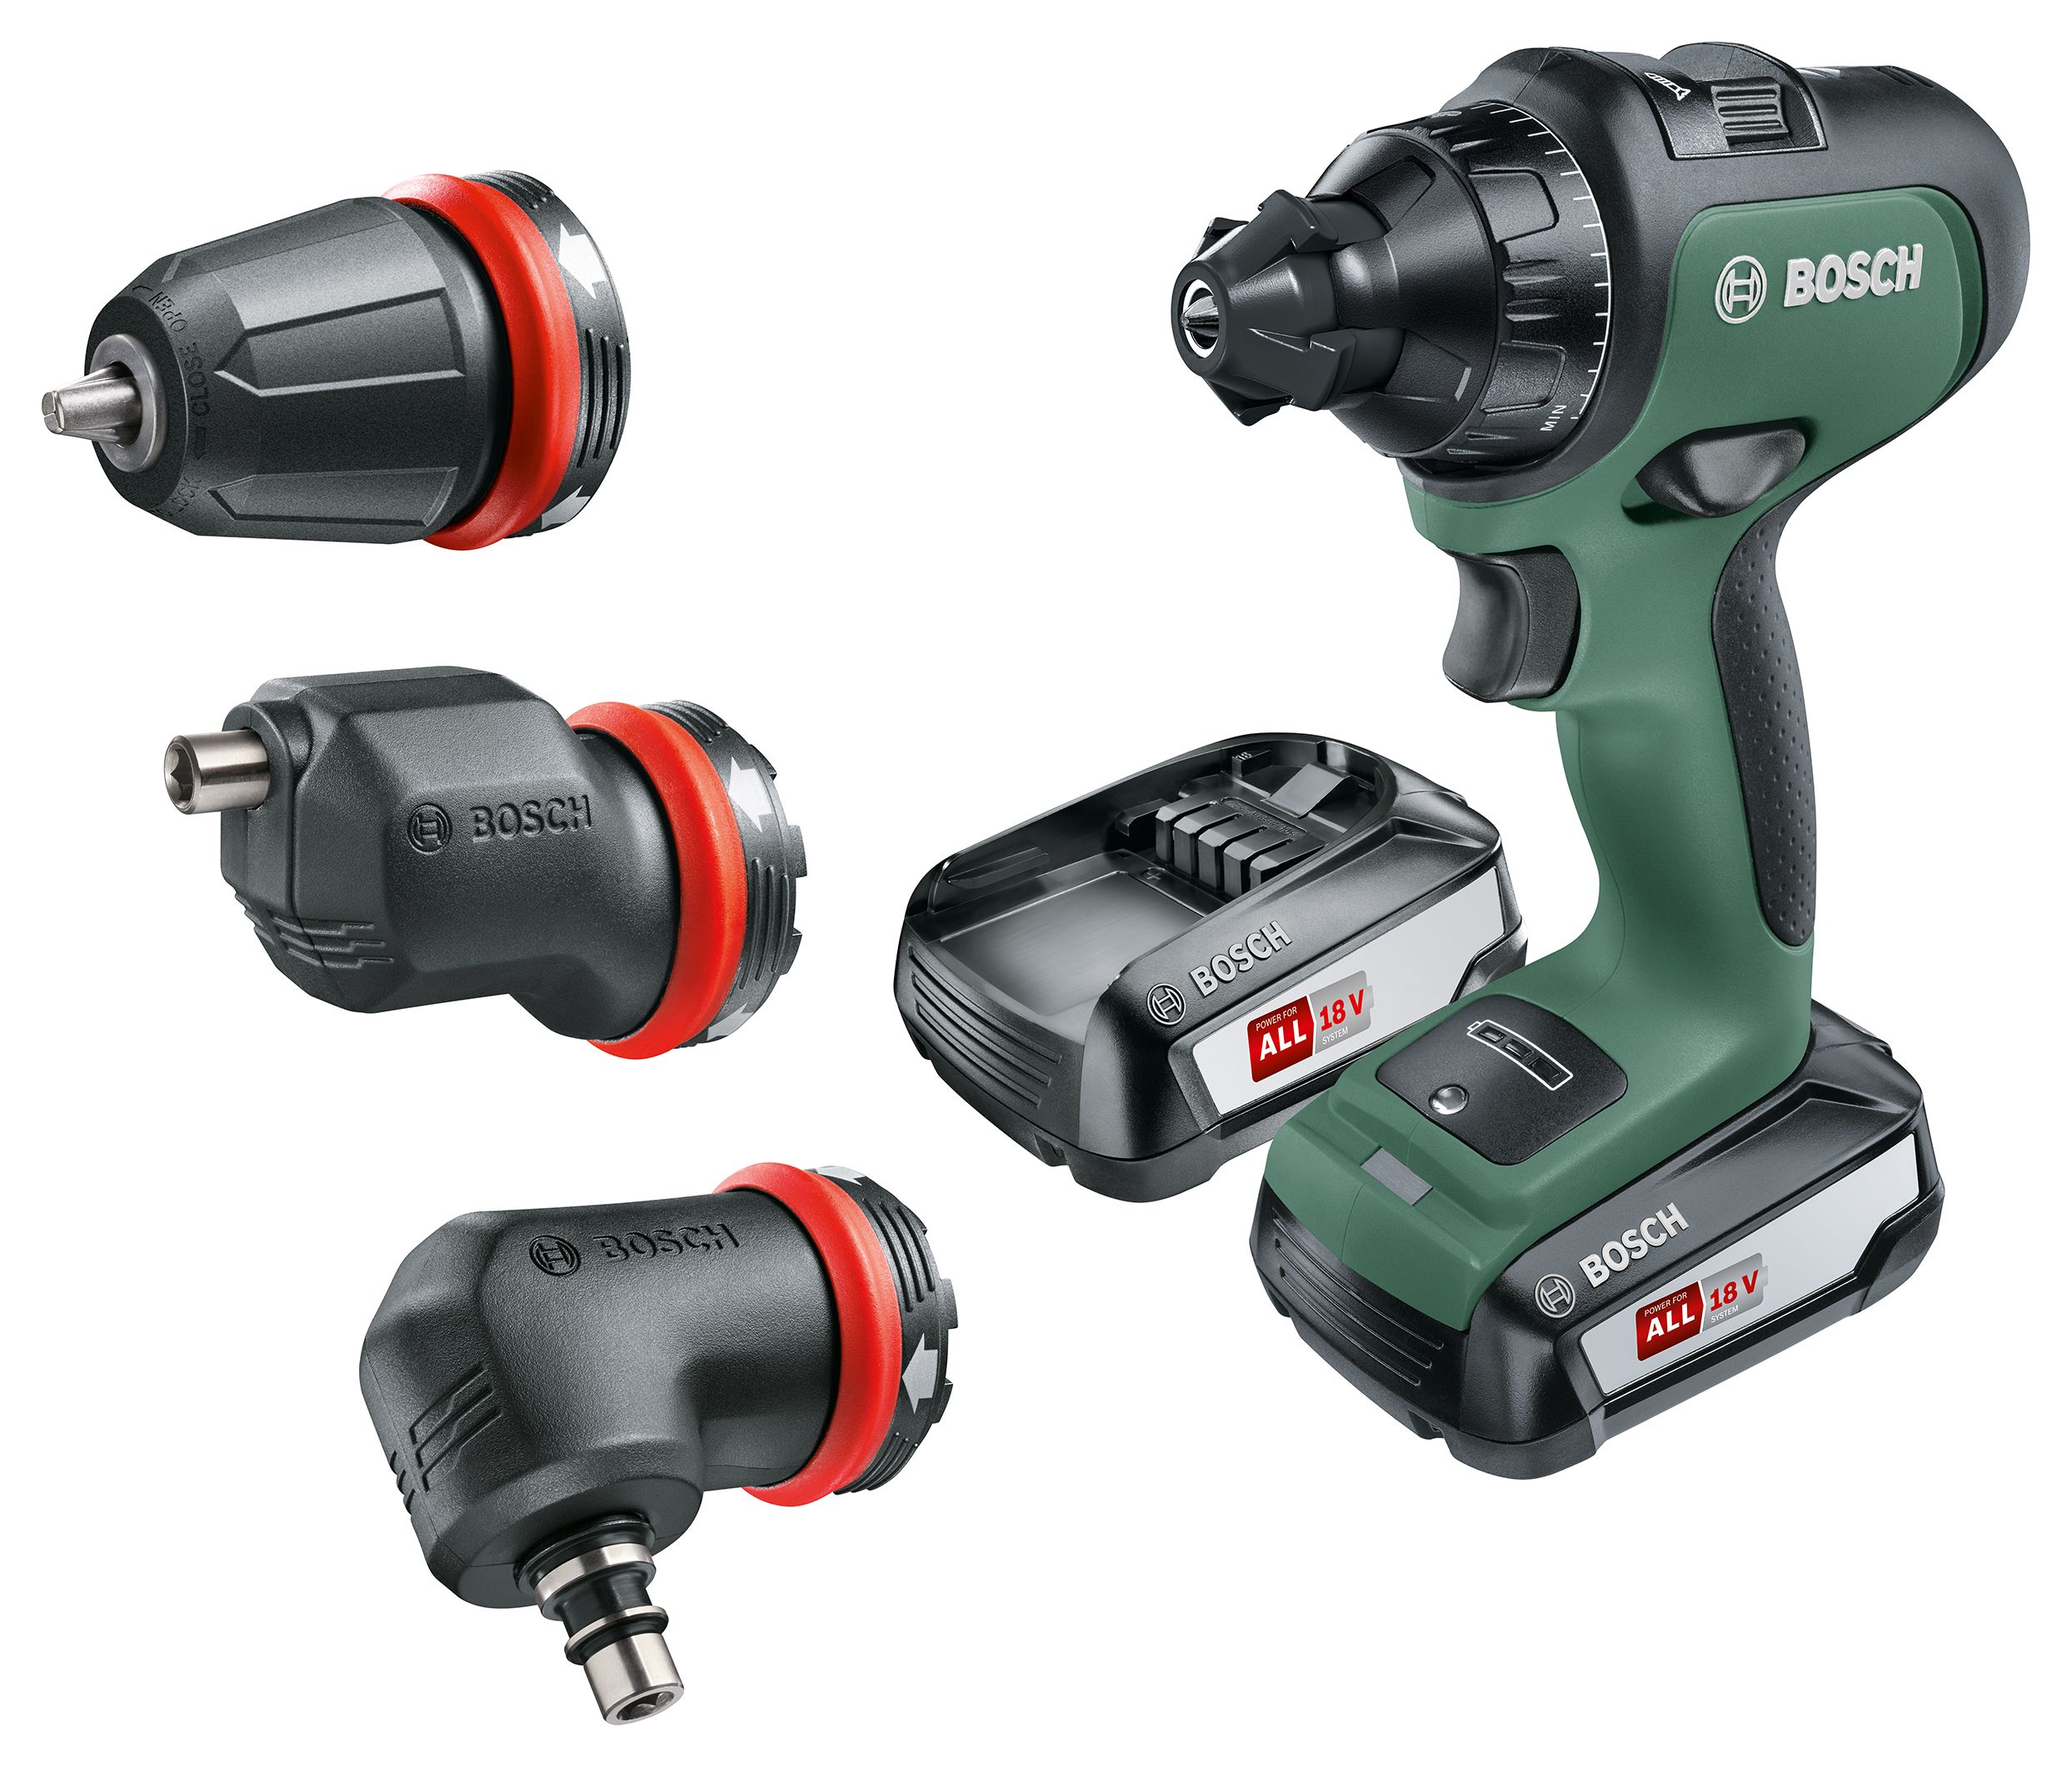 Image of Bosch Advanceddrill 18 Cordless Brushless 2 X 2.5ah Drill / Driver With 3 X Attachment Set